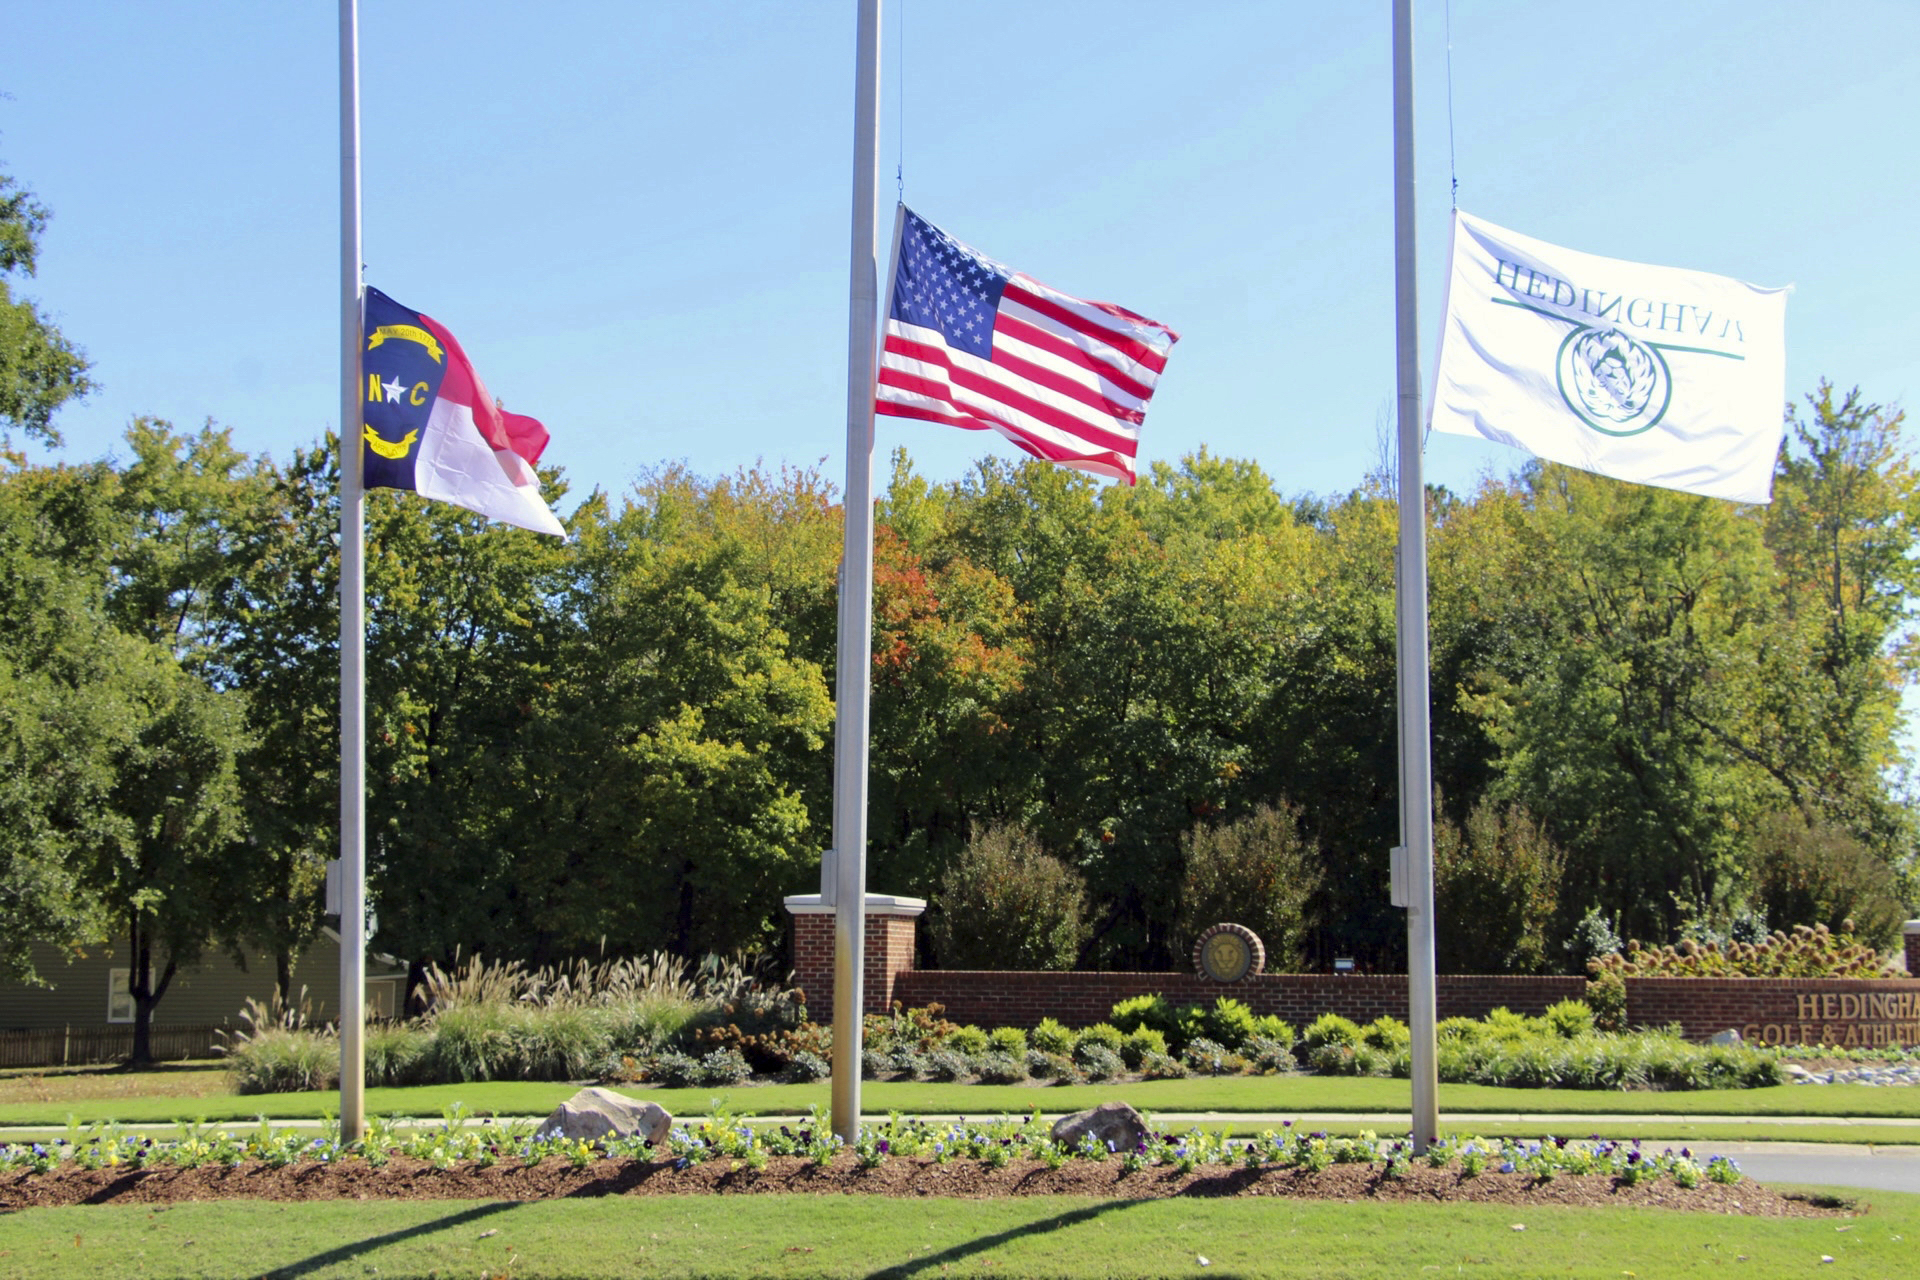 The North Carolina flag, American flag and Hedingham flag all fly at half-staff at the entrance to the Hedingham Golf Club in Raleigh, N.C., on Friday after a shooting in the community left five dead Thursday night, including one off-duty police officer.